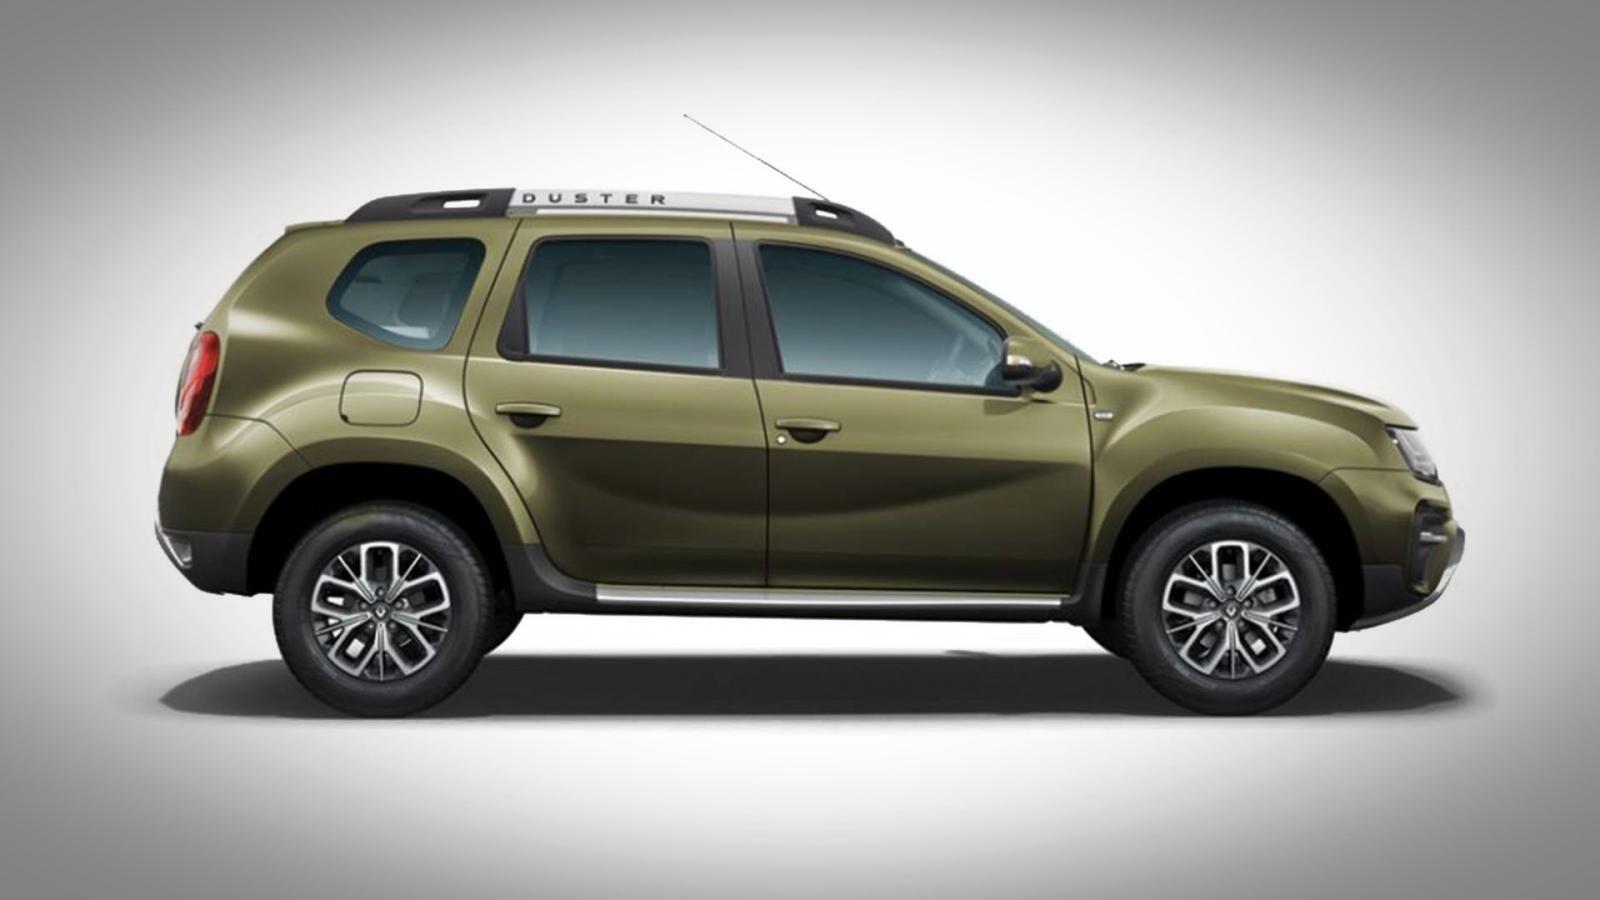 Renault Duster outback bronze